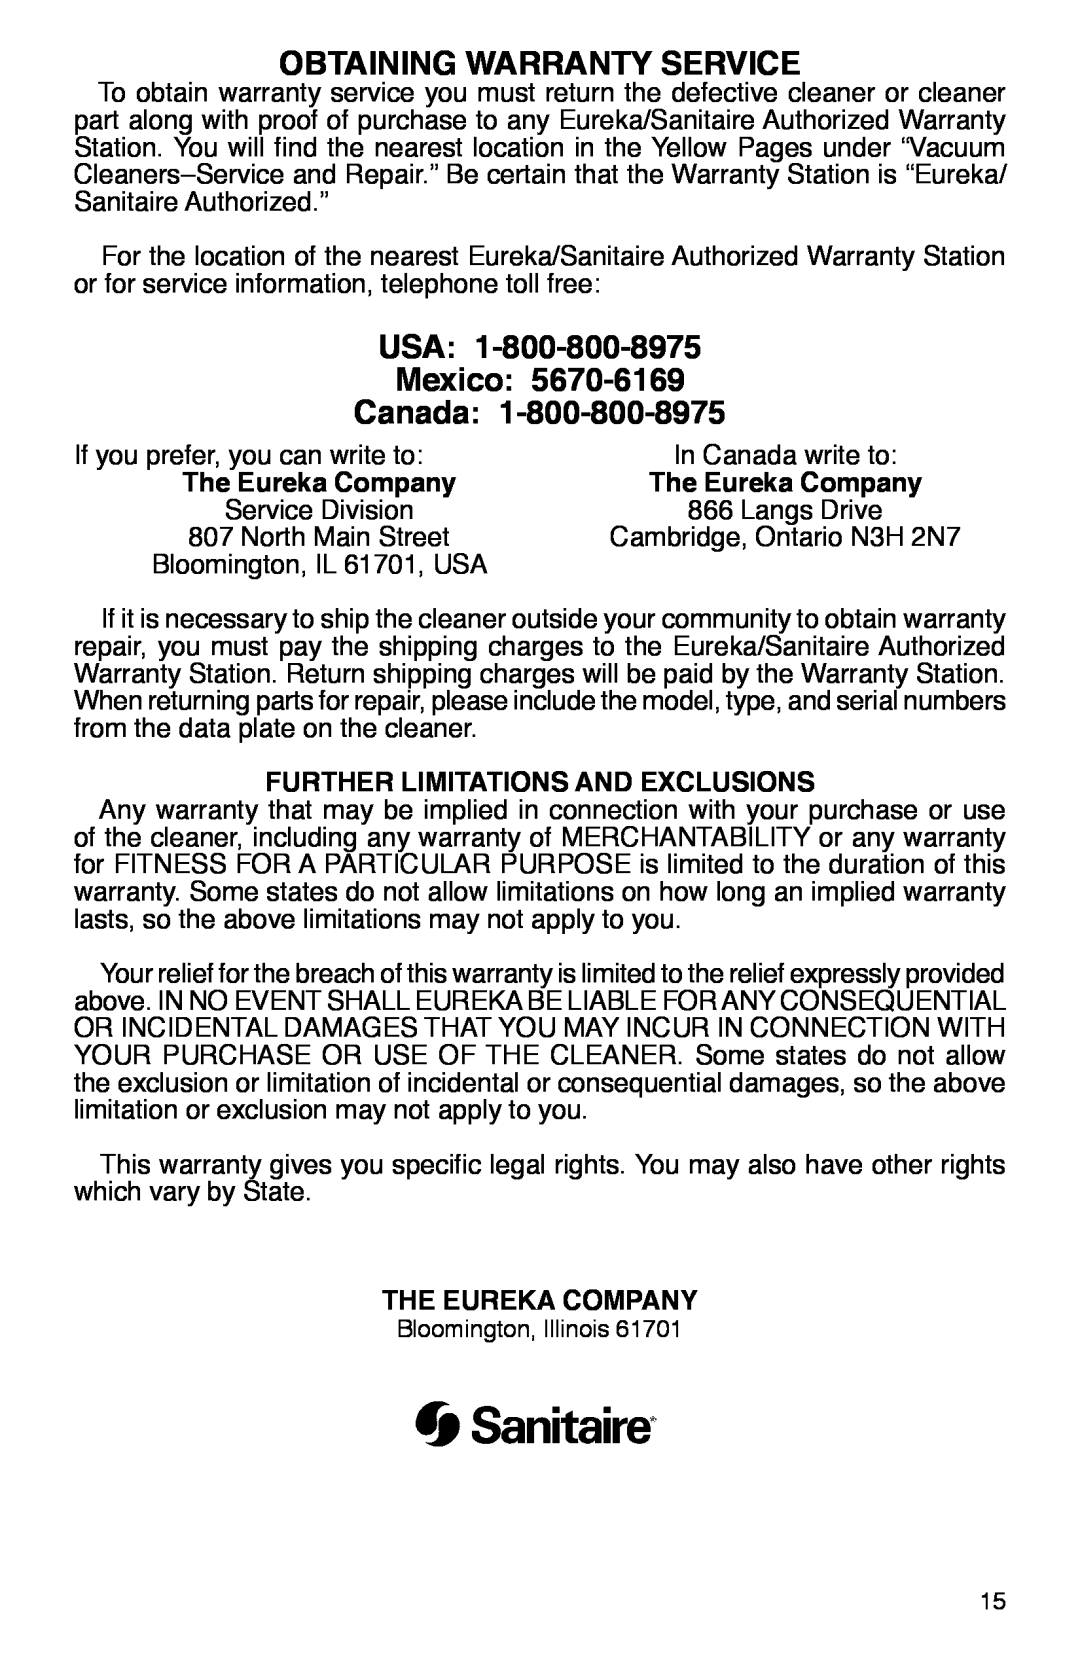 Sanitaire SC2800 Obtaining Warranty Service, USA Mexico Canada, Further Limitations And Exclusions, The Eureka Company 